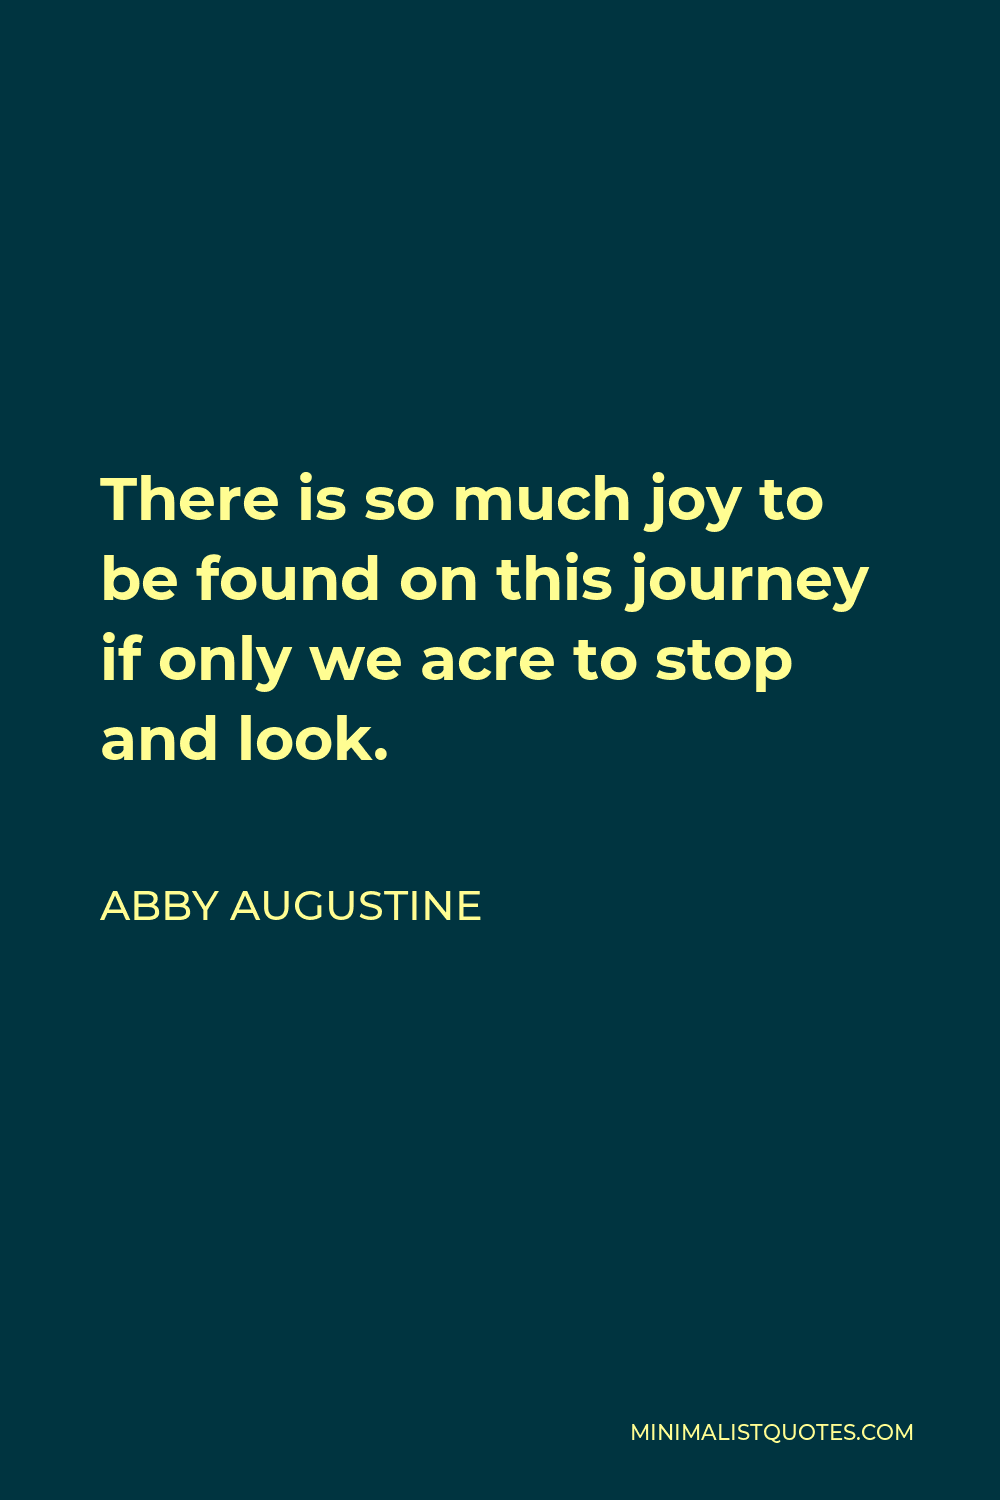 Abby Augustine Quote - There is so much joy to be found on this journey if only we acre to stop and look.